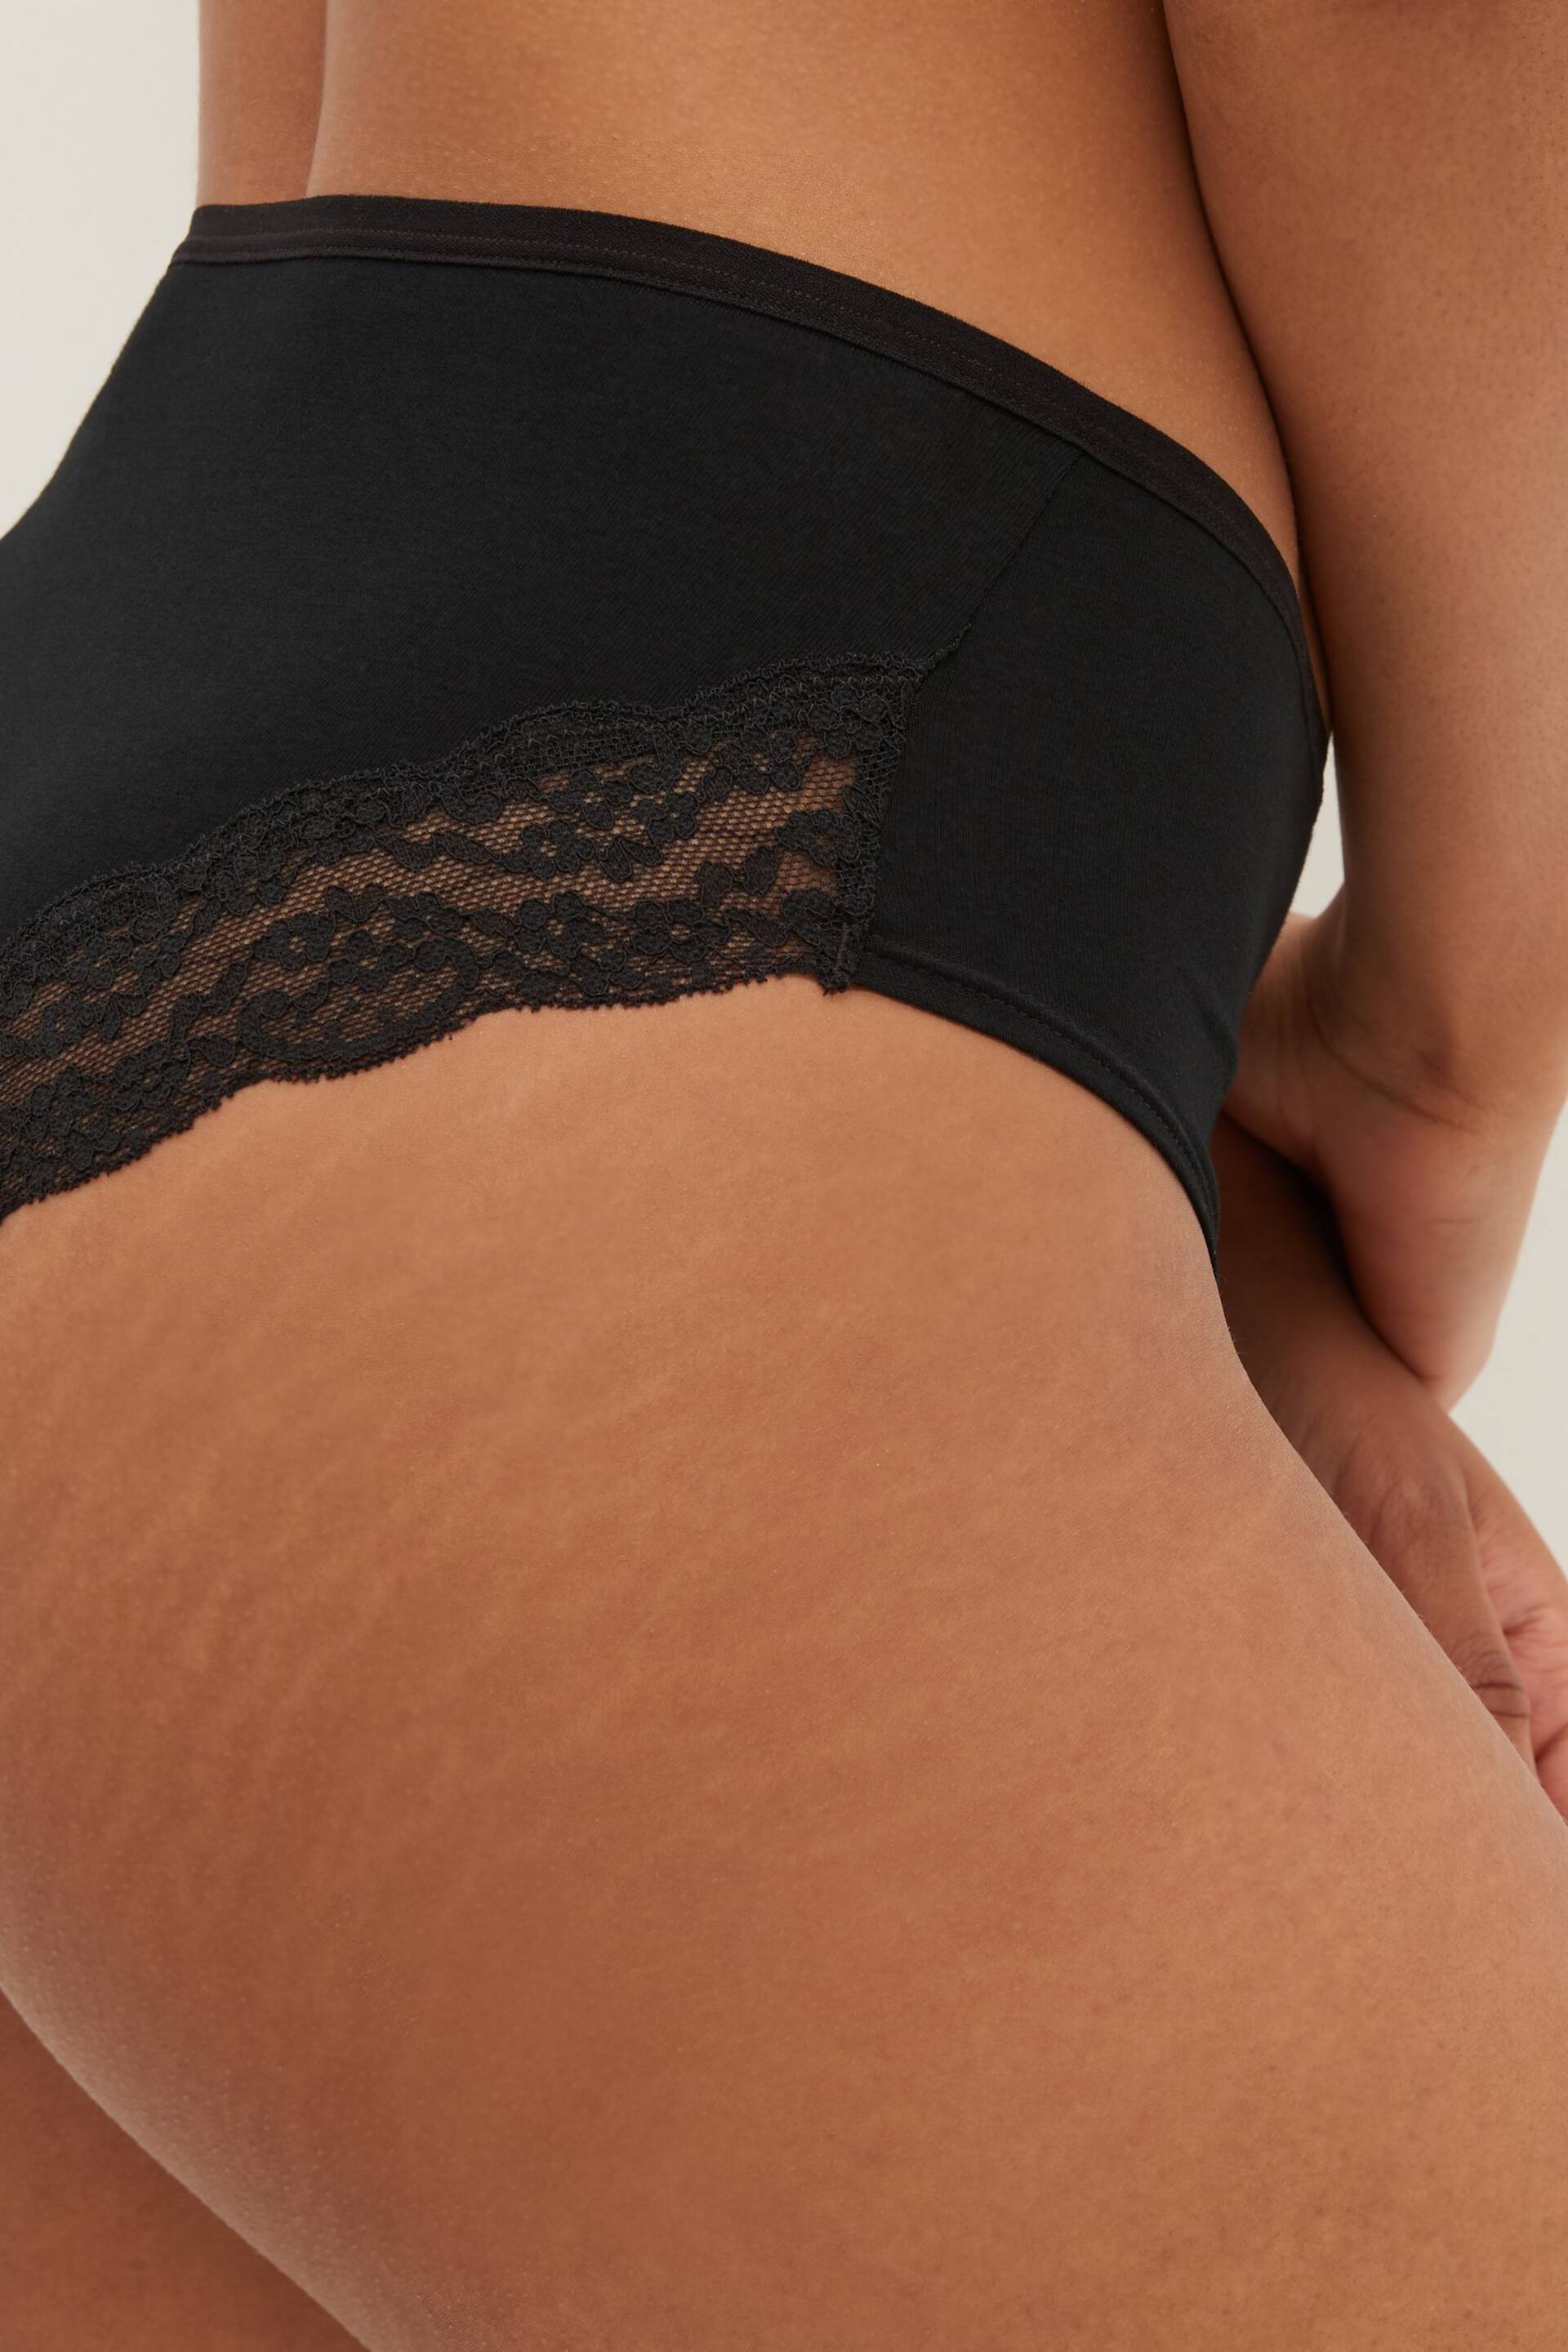 Black High Rise High Leg Cotton and Lace Knickers 4 Pack - Image 3 of 5